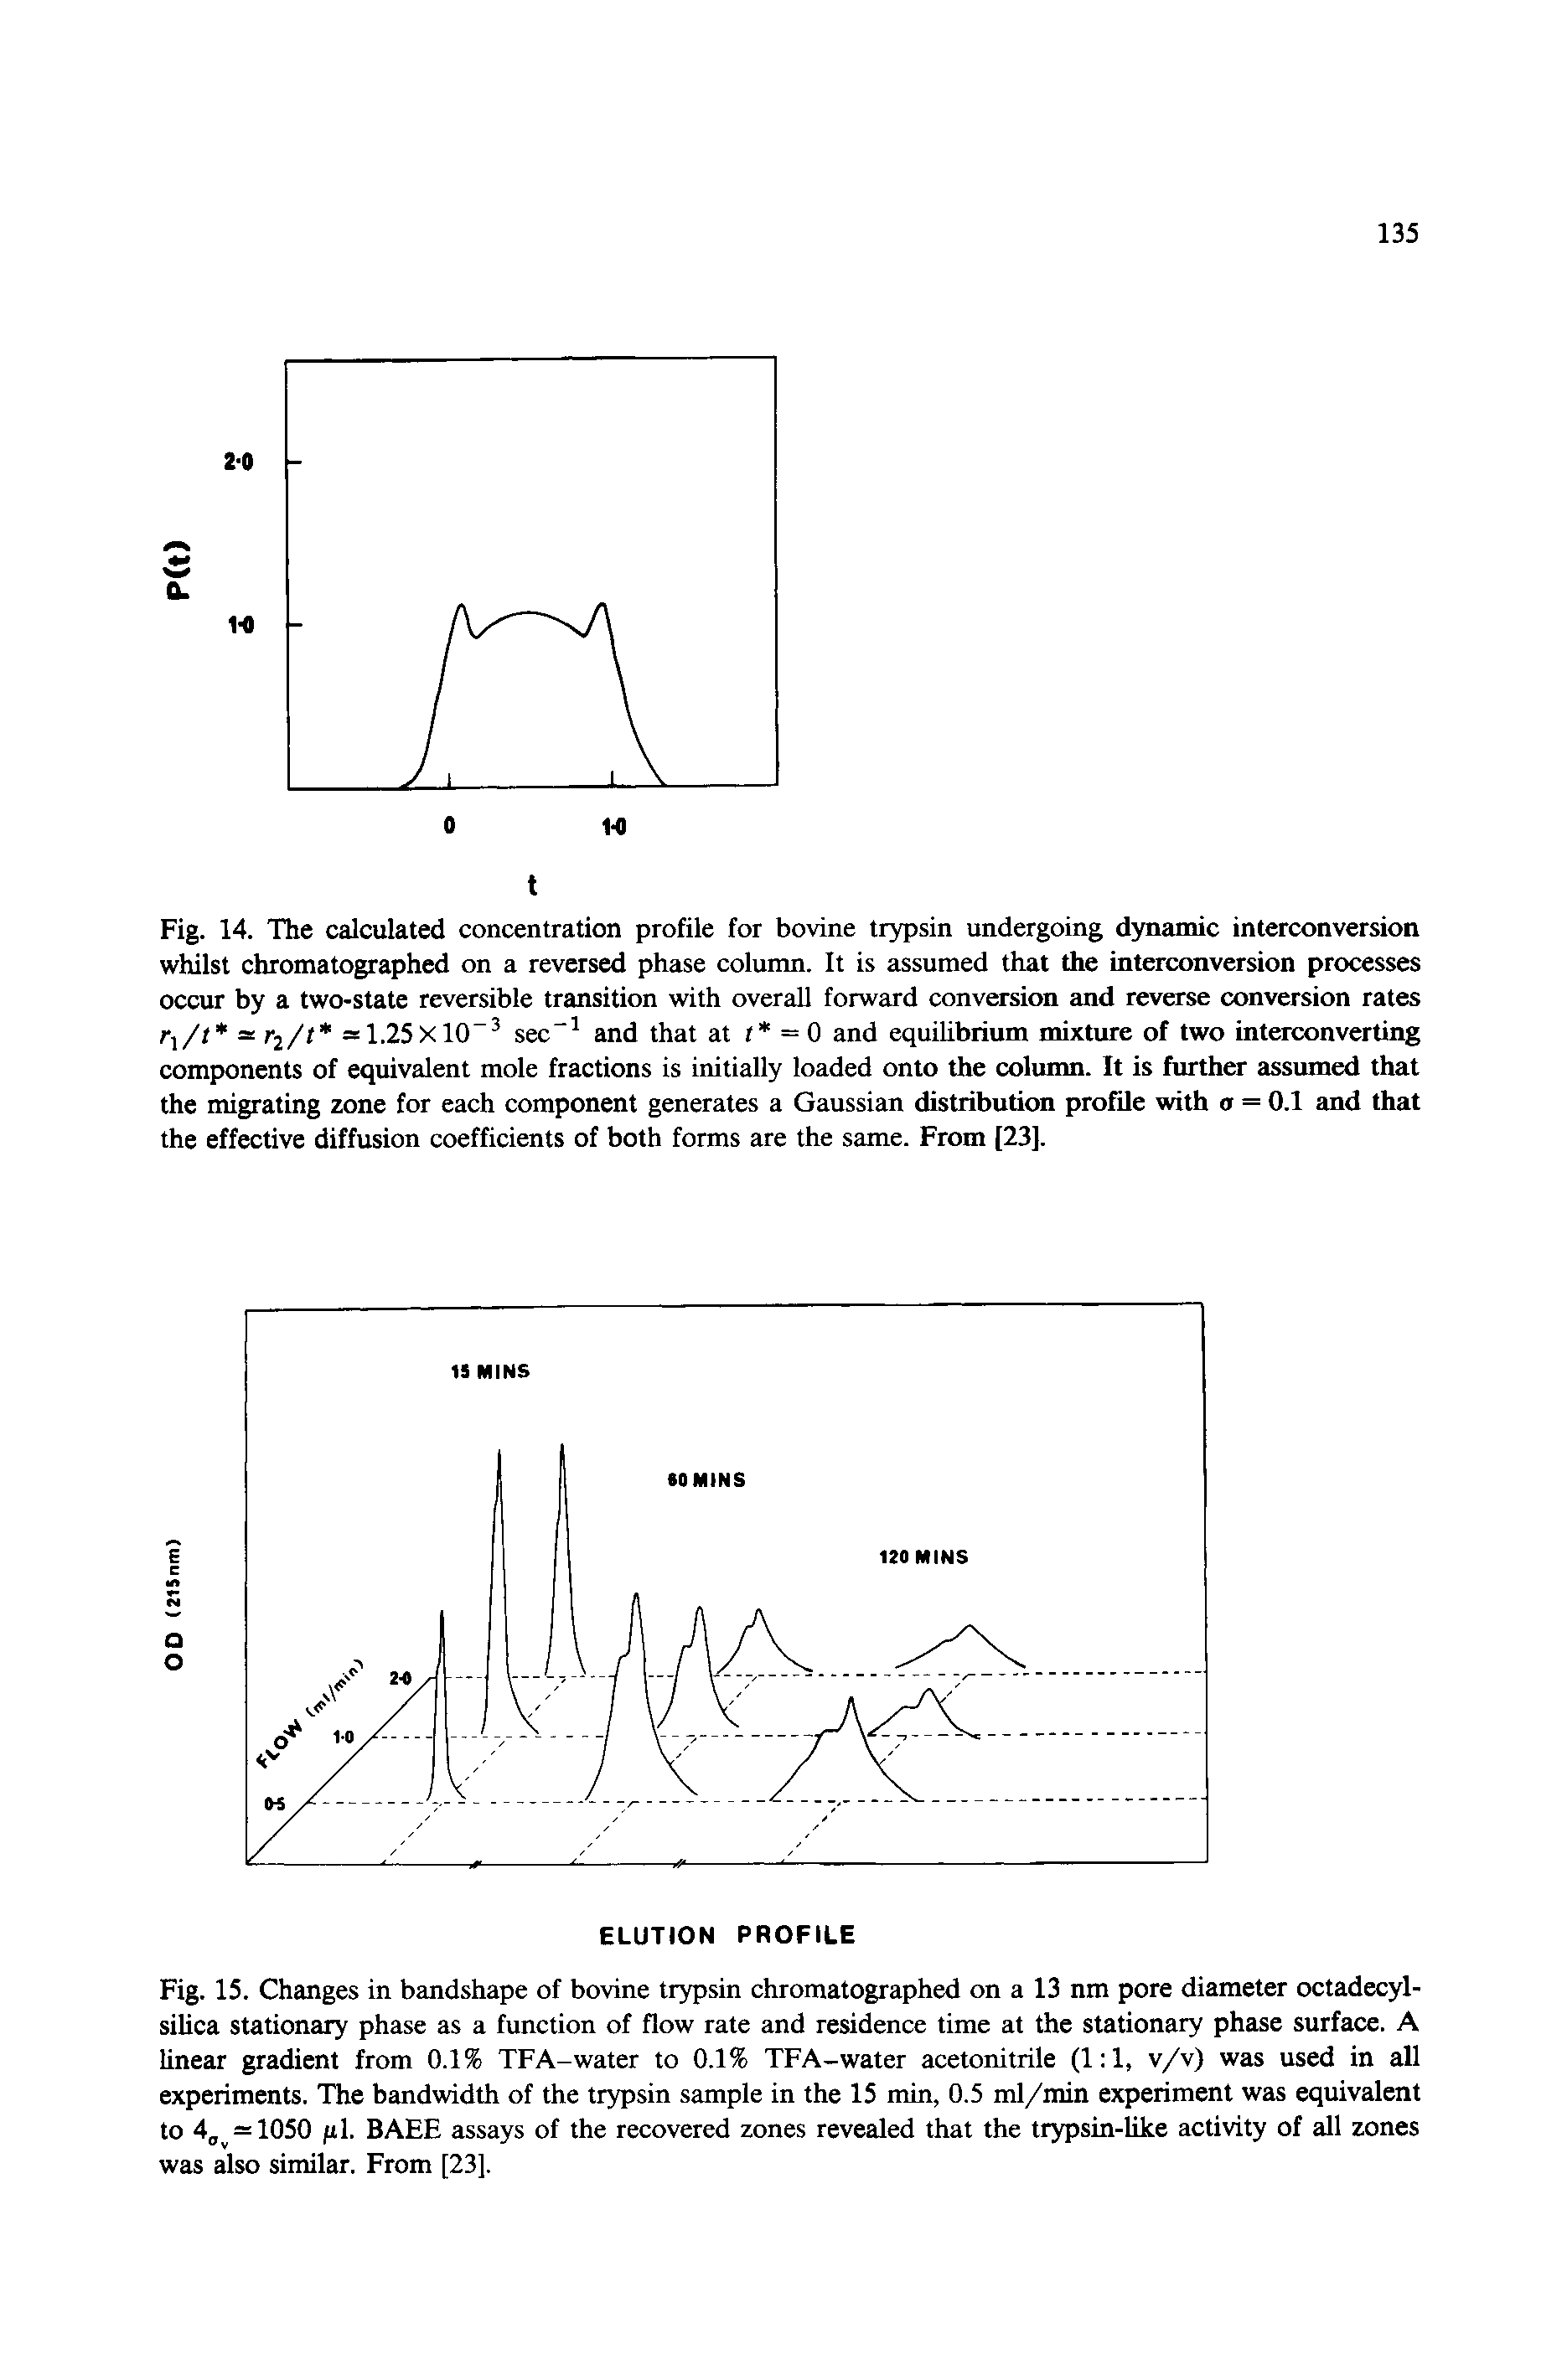 Fig. 14. The calculated concentration profile for bovine trypsin undergoing dynamic interconversion whilst chromatographed on a reversed phase column. It is assumed that the interconversion processes occur by a two-state reversible transition with overall forward conversion and reverse conversion rates r /t = r /t =1.25X10 sec and that at / = 0 and equilibrium mixture of two inteiconverting components of equivalent mole fractions is initially loaded onto the column. It is further assumed that the migrating zone for each component generates a Gaussian distribution profile with a = 0.1 and that the effective diffusion coefficients of both forms are the same. From (23].